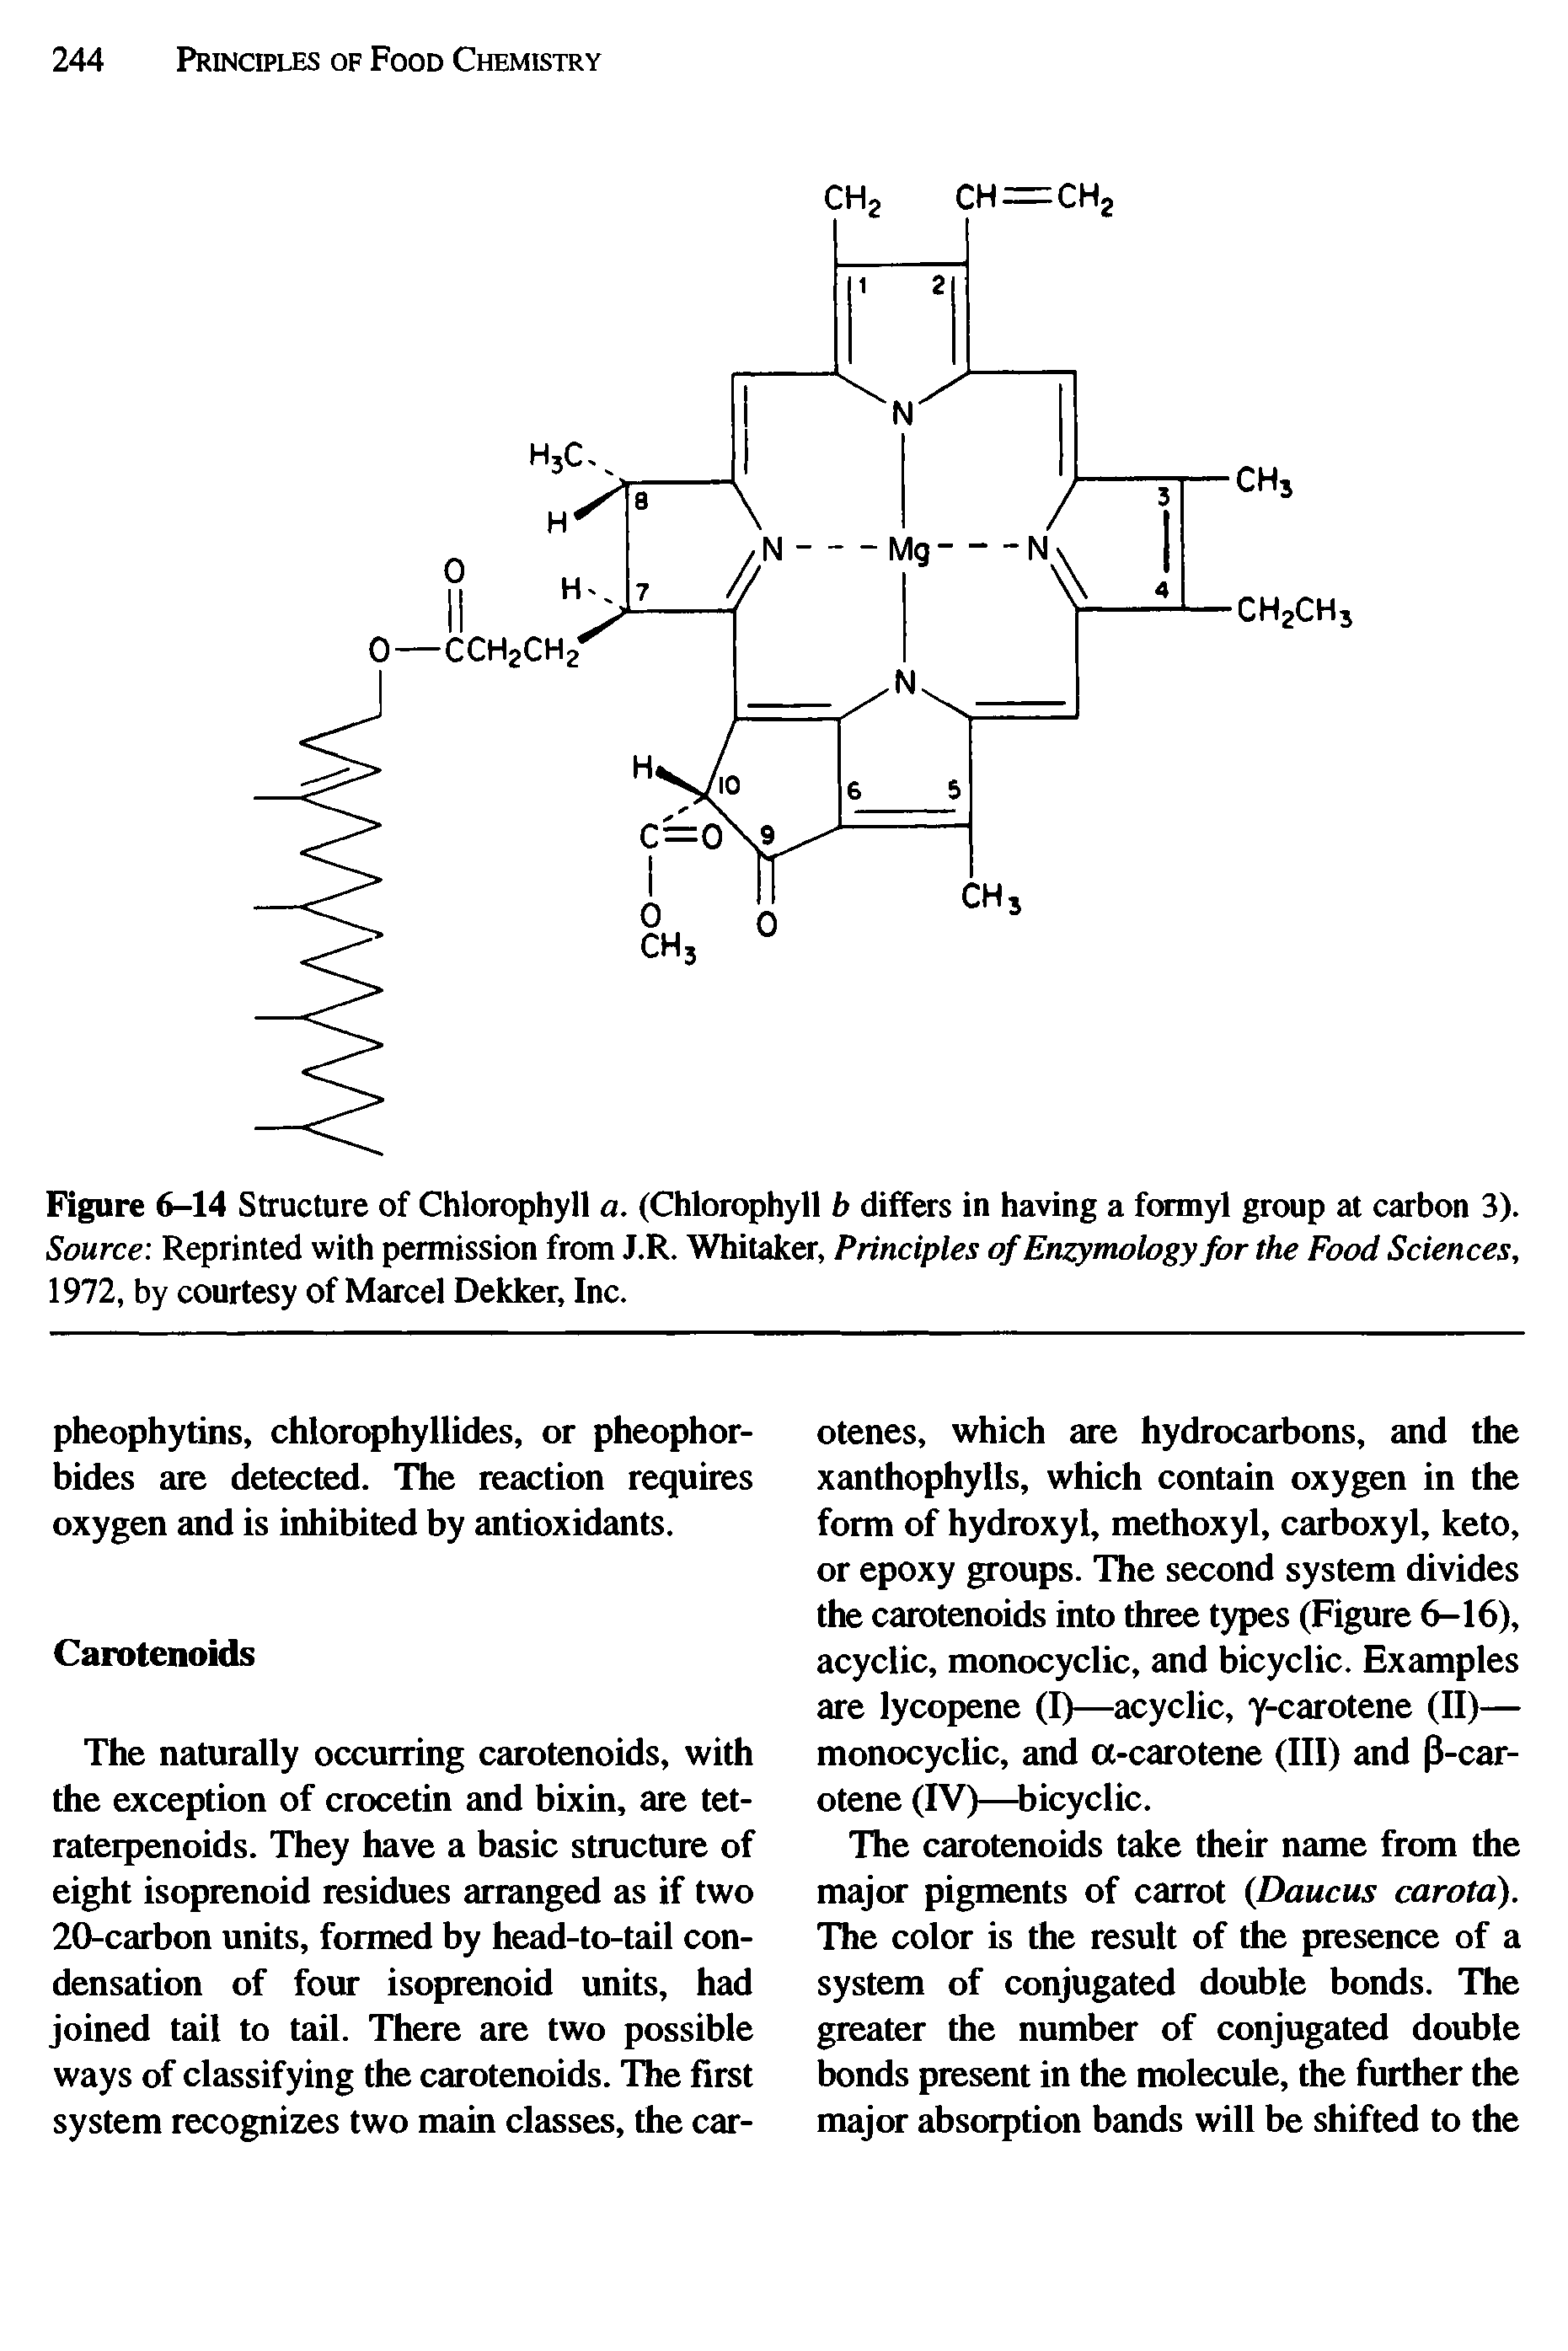 Figure 6-14 Structure of Chlorophyll a. (Chlorophyll b differs in having a formyl group at carbon 3). Source Reprinted with permission from J.R. Whitaker, Principles ofEnzymology for the Food Sciences, 1972, by courtesy of Marcel Dekker, Inc.